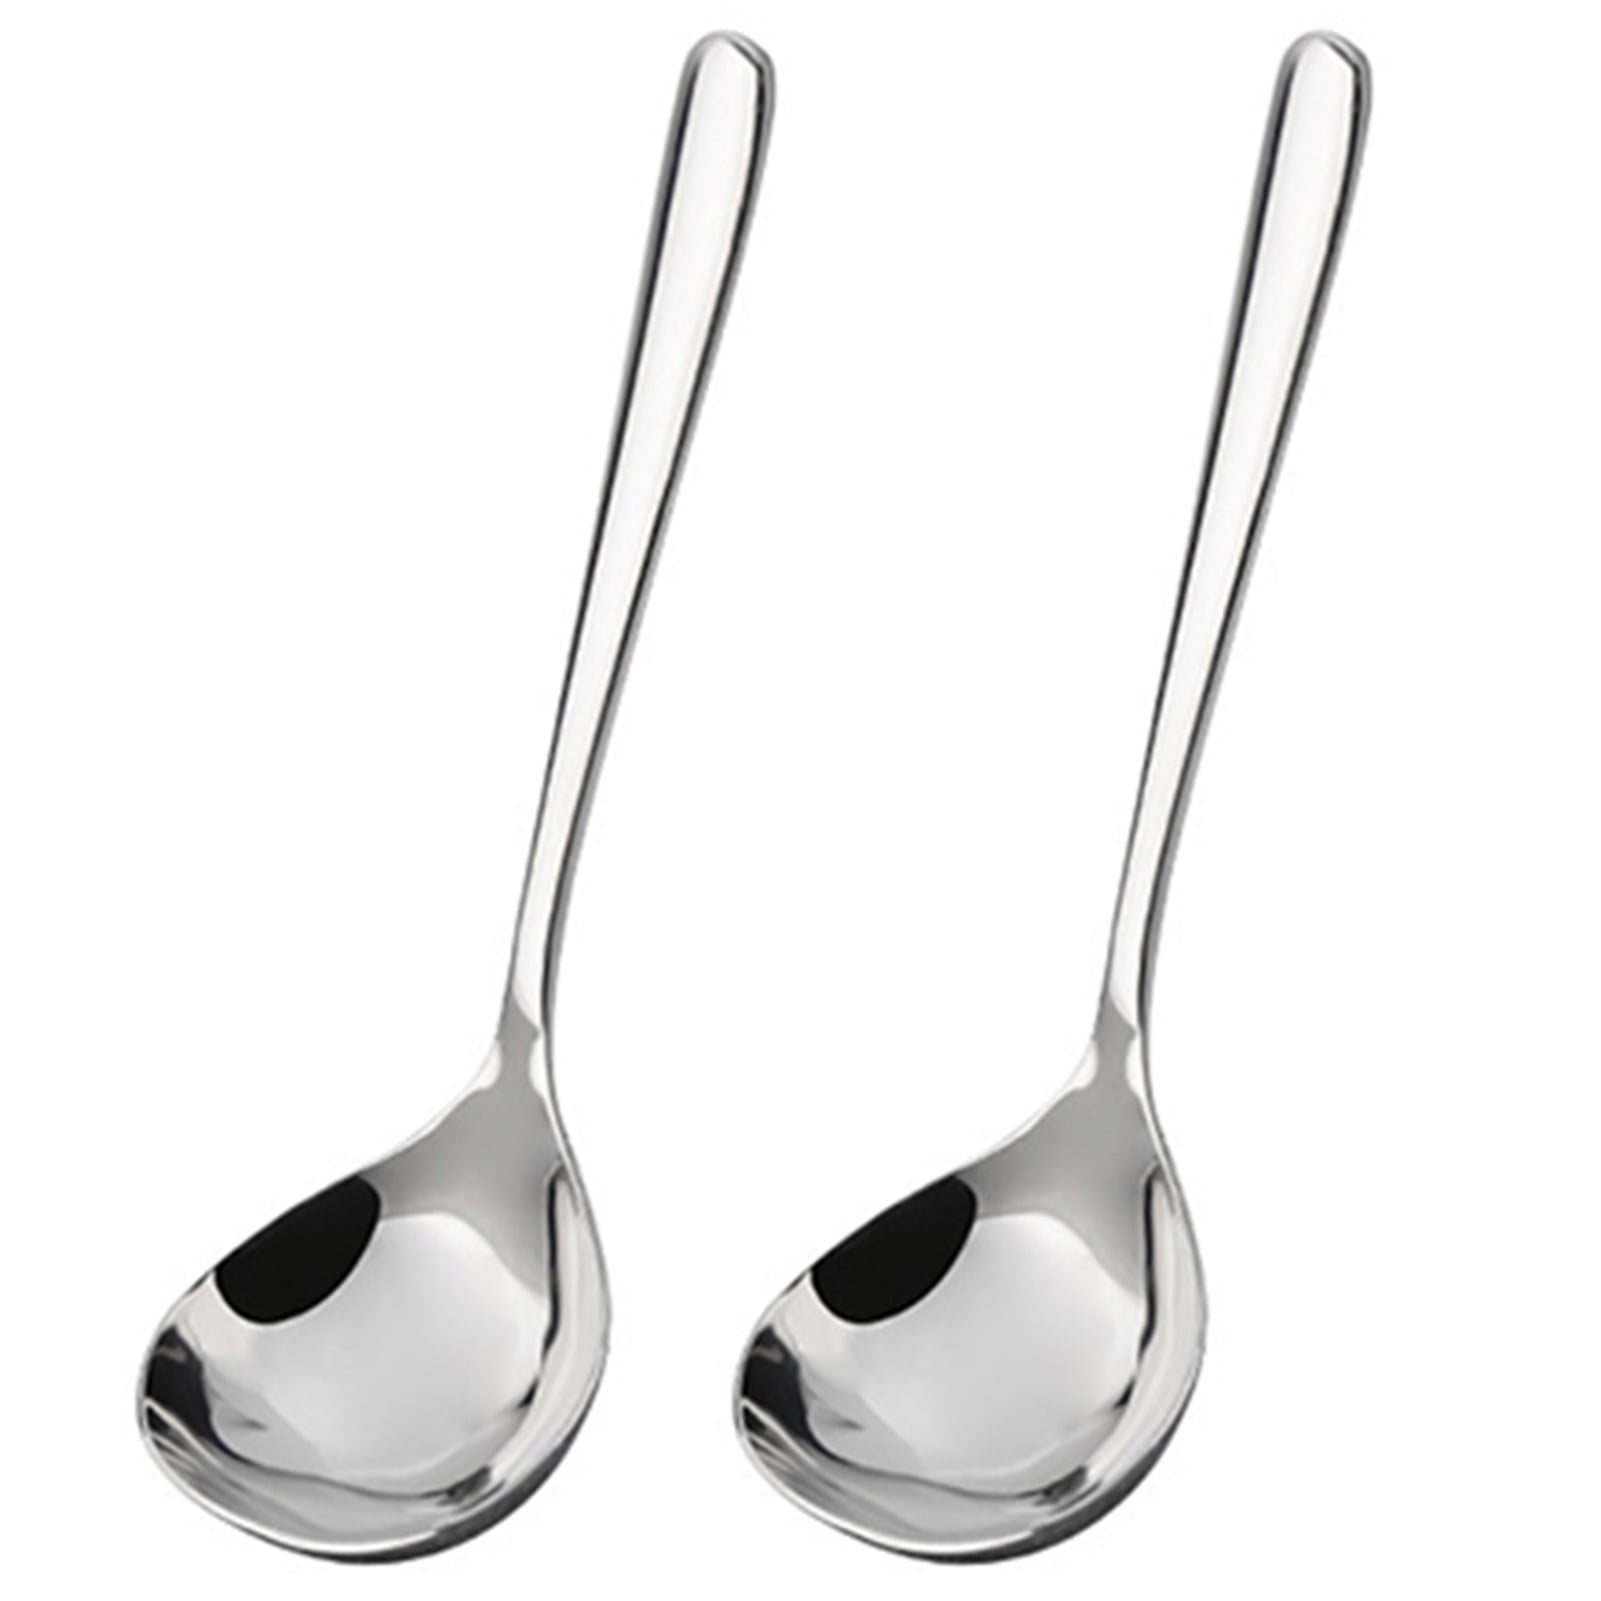 Size 1: 5 Mini Serving Ladle Stainless Steel with Hook Small Oil Ladle Serving Ladle Soup Gravy Sauces Ladle by Global Kitchen 